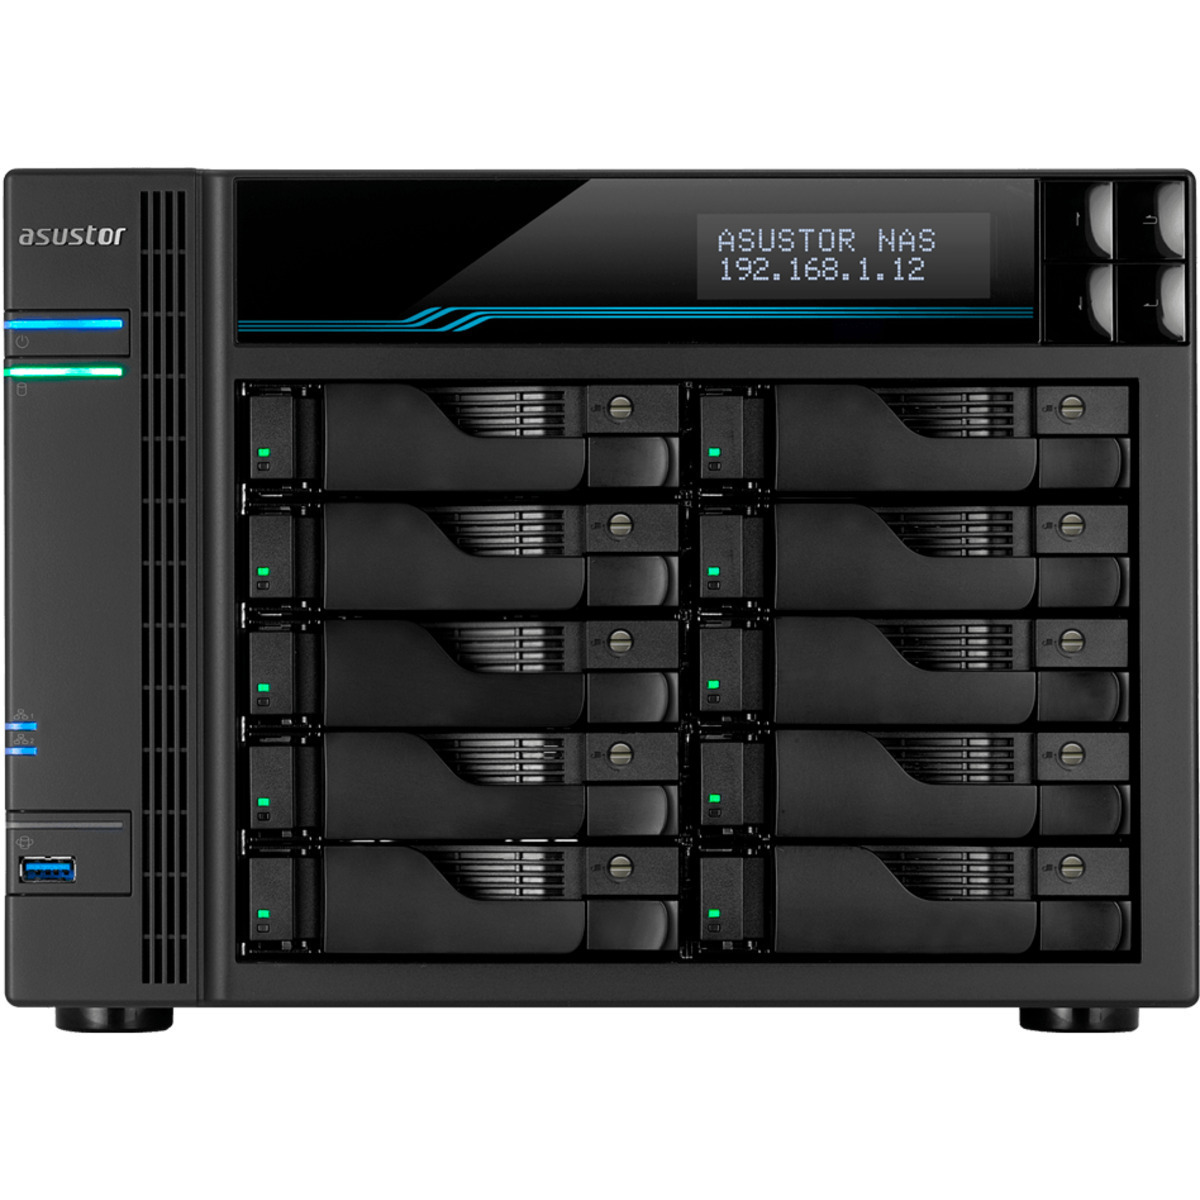 ASUSTOR AS6510T Lockerstor 10 108tb 10-Bay Desktop Multimedia / Power User / Business NAS - Network Attached Storage Device 9x12tb Seagate IronWolf Pro ST12000NT001 3.5 7200rpm SATA 6Gb/s HDD NAS Class Drives Installed - Burn-In Tested - ON SALE - FREE RAM UPGRADE AS6510T Lockerstor 10